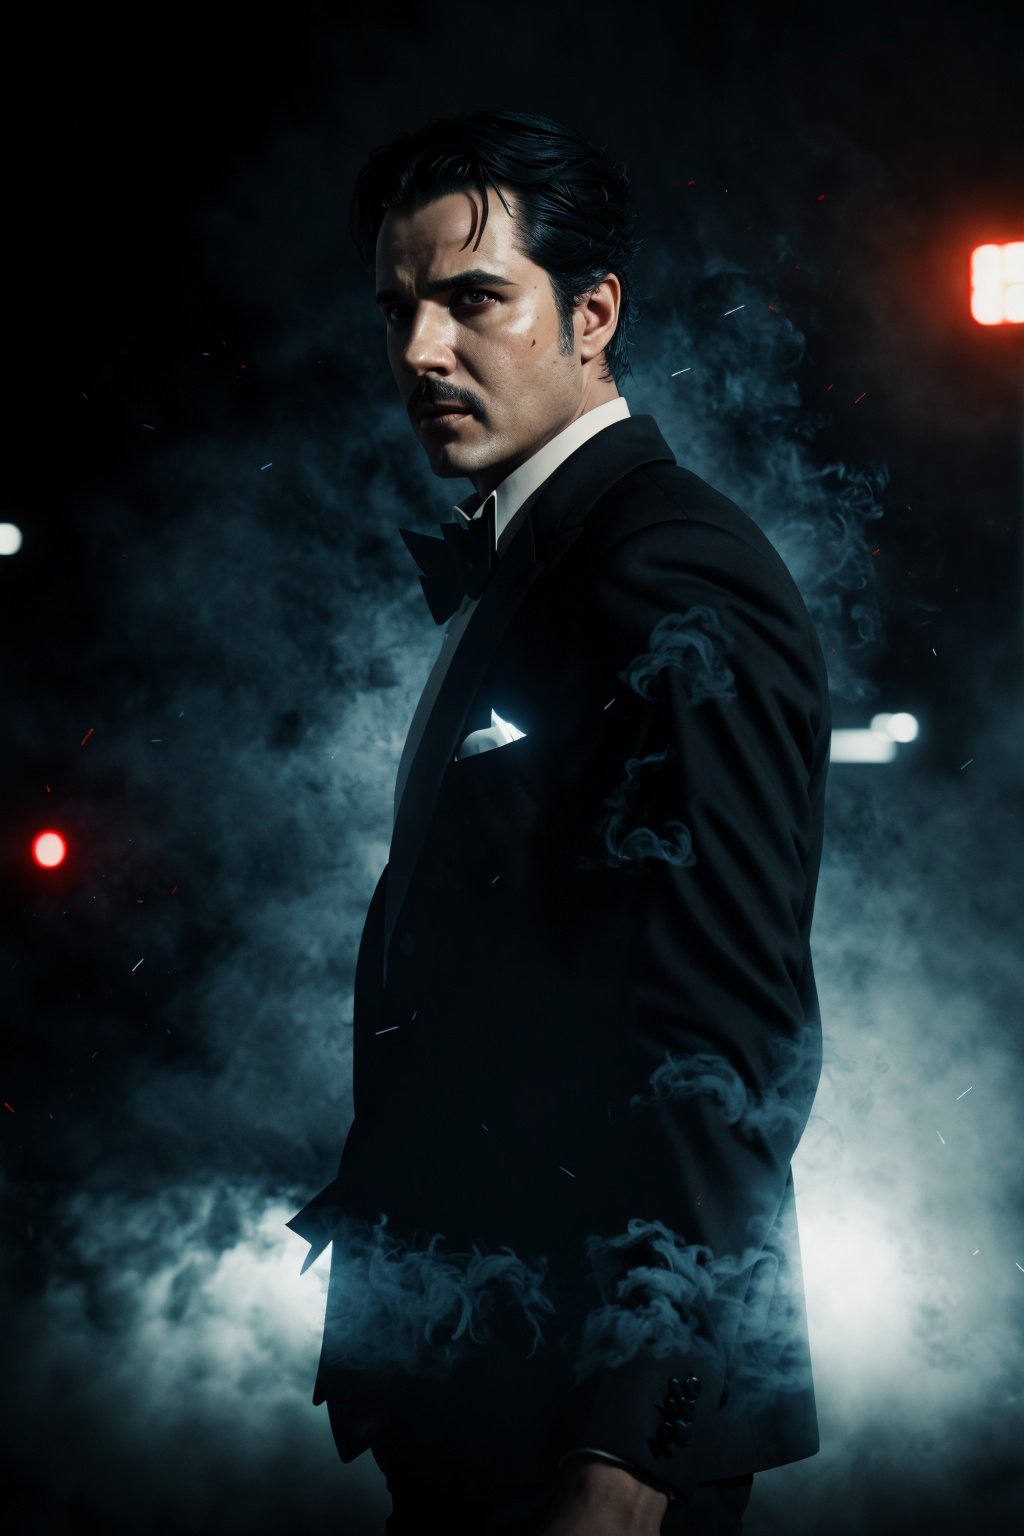 guiltys, a detective man, tuxedo on, thriller theme, upper body, deal with it, serious theme, dramatic mood, (bokeh:1.1), depth of field, style of Casey Baugh, tracers, vfx, splashes, light particles, police departament background, signs, illustration, artstation, smoke, fog, steam